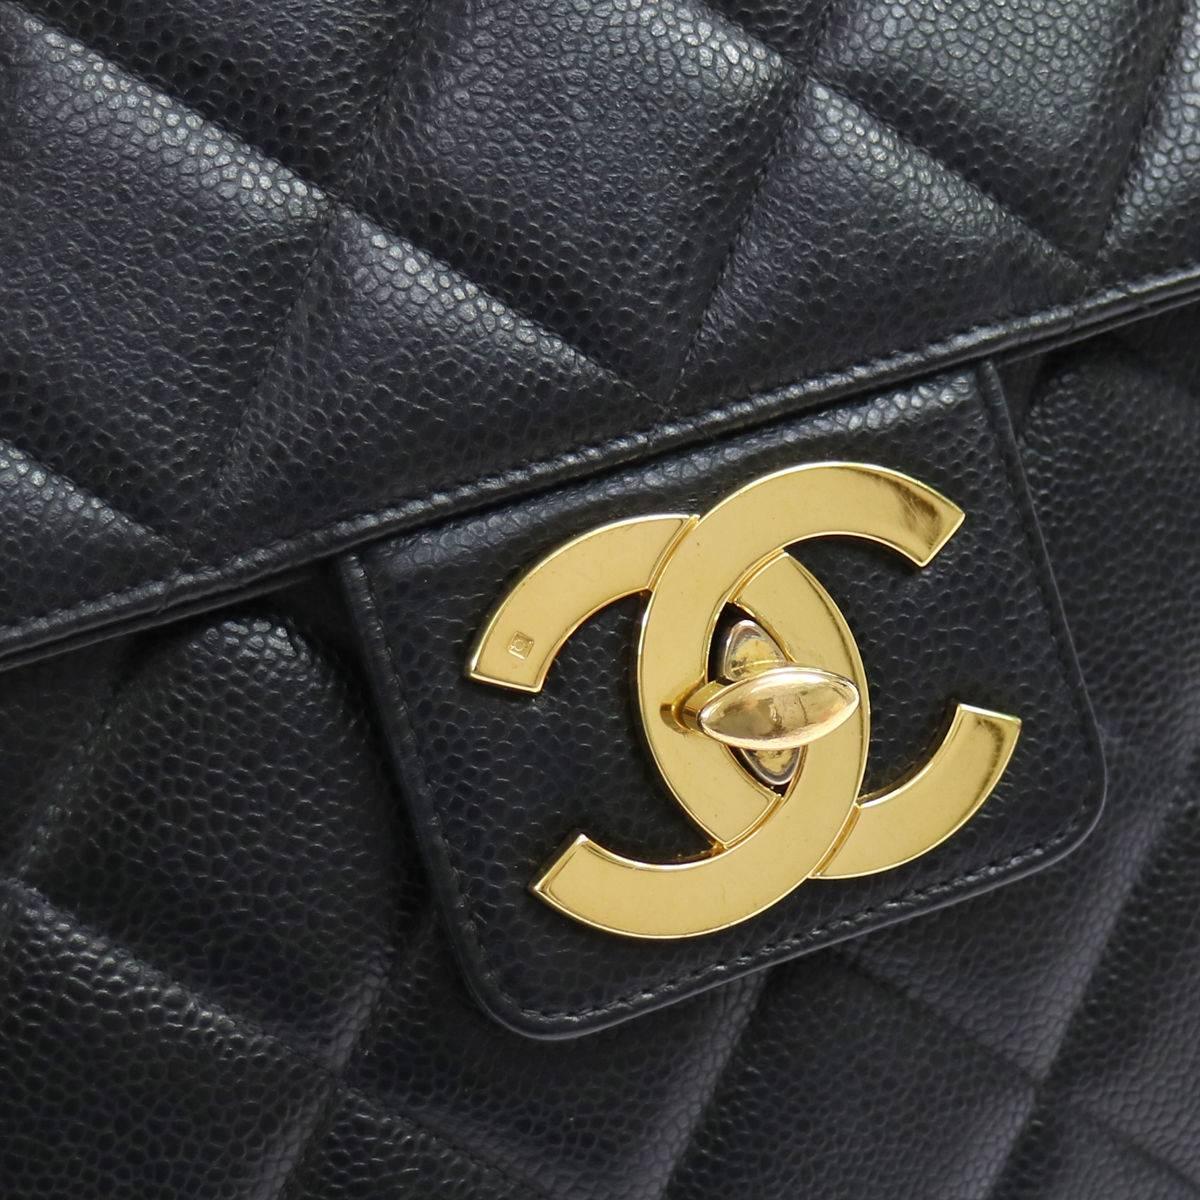 Chanel Caviar Leather Carryall Business Top Handle Travel Brief Briefcase Bag 

Caviar
Gold tone hardware
Turnlock closure
Handle drop 4